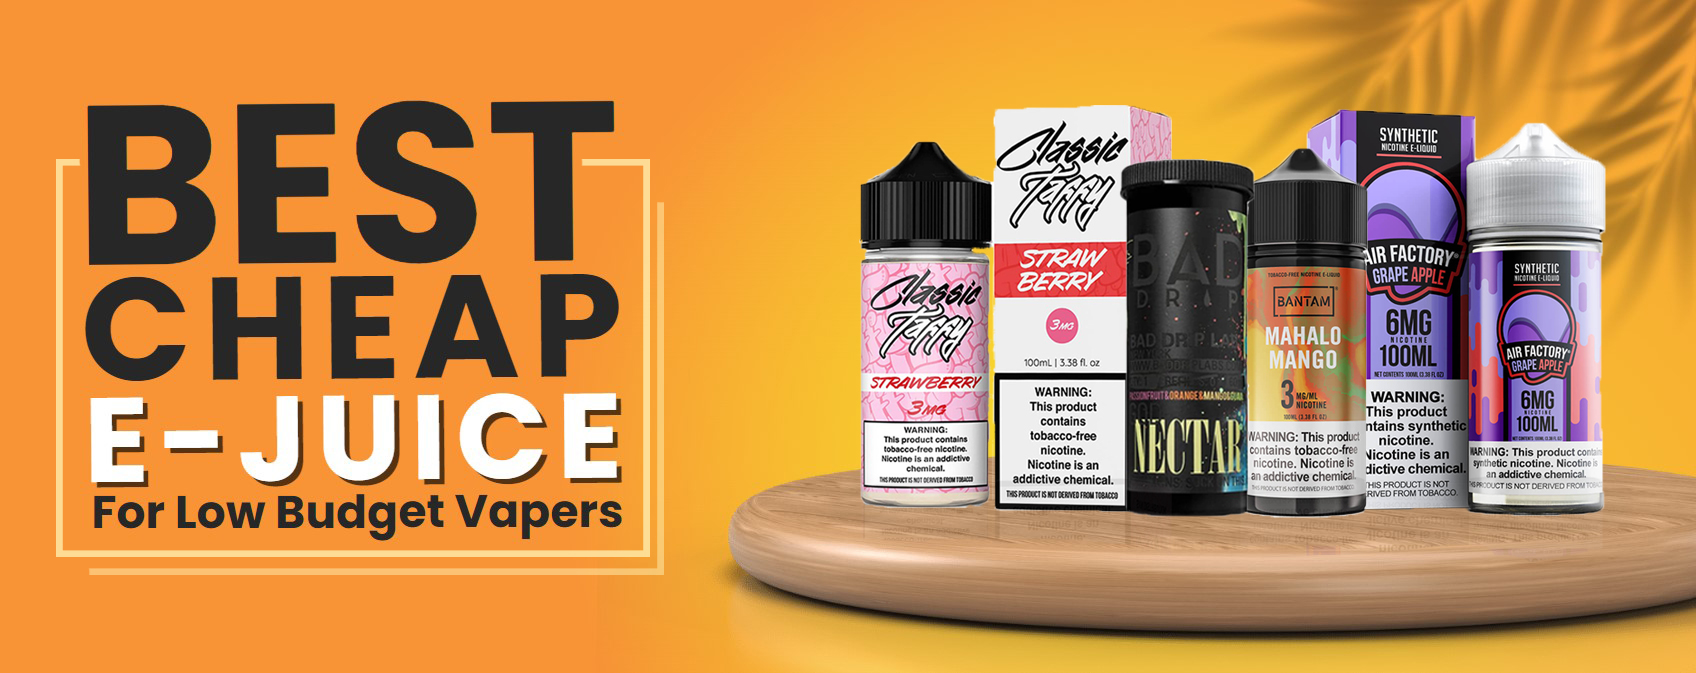 Best Cheap Ejuice for Low-Budget Vapers